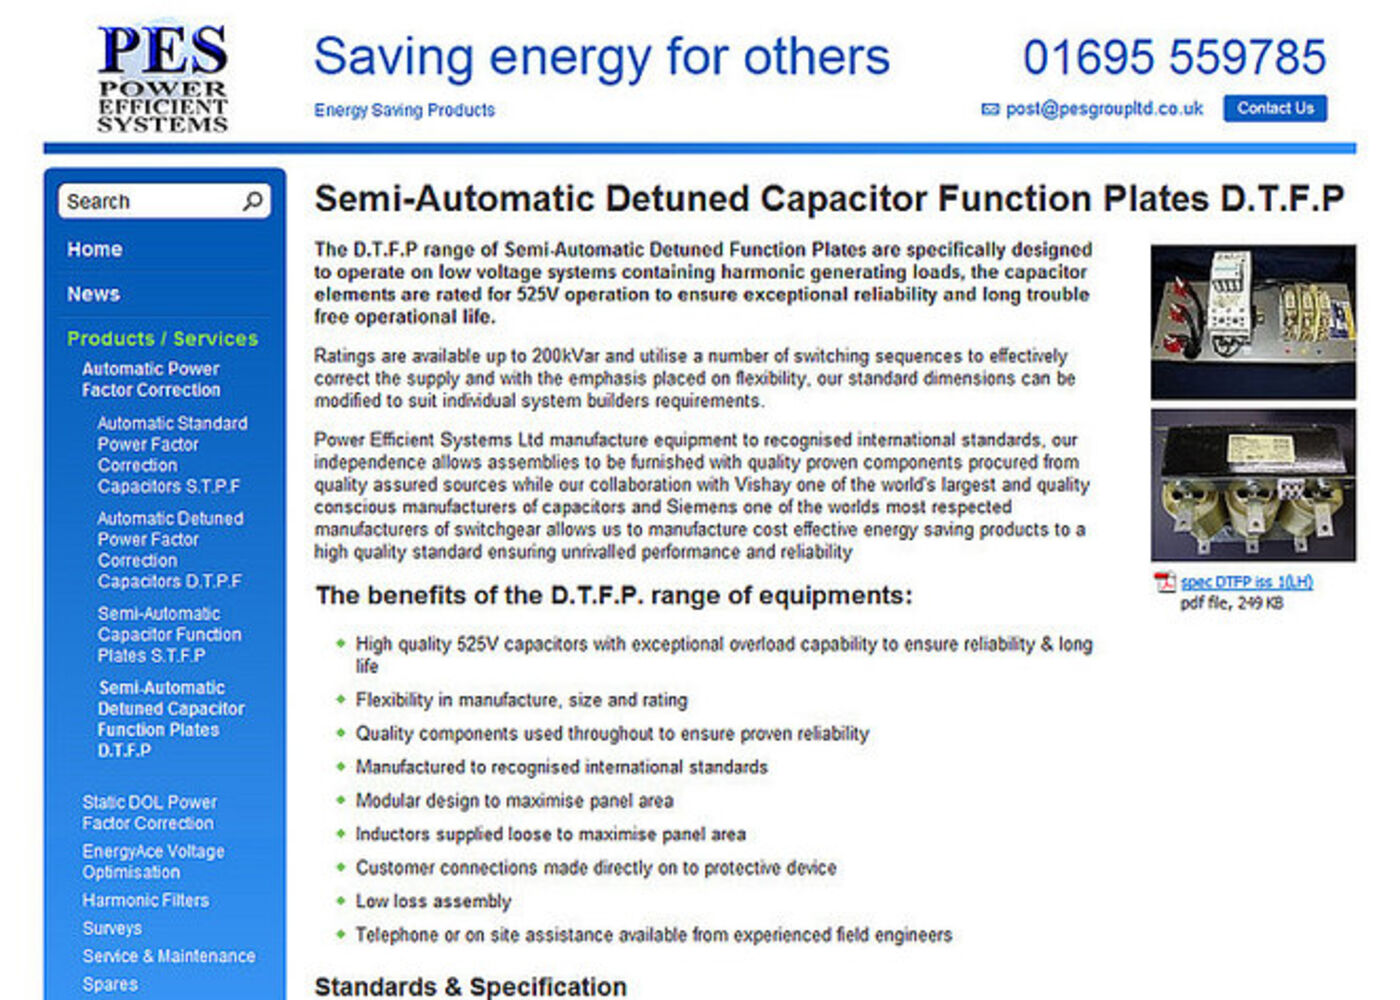 Power Efficient Systems Regular page